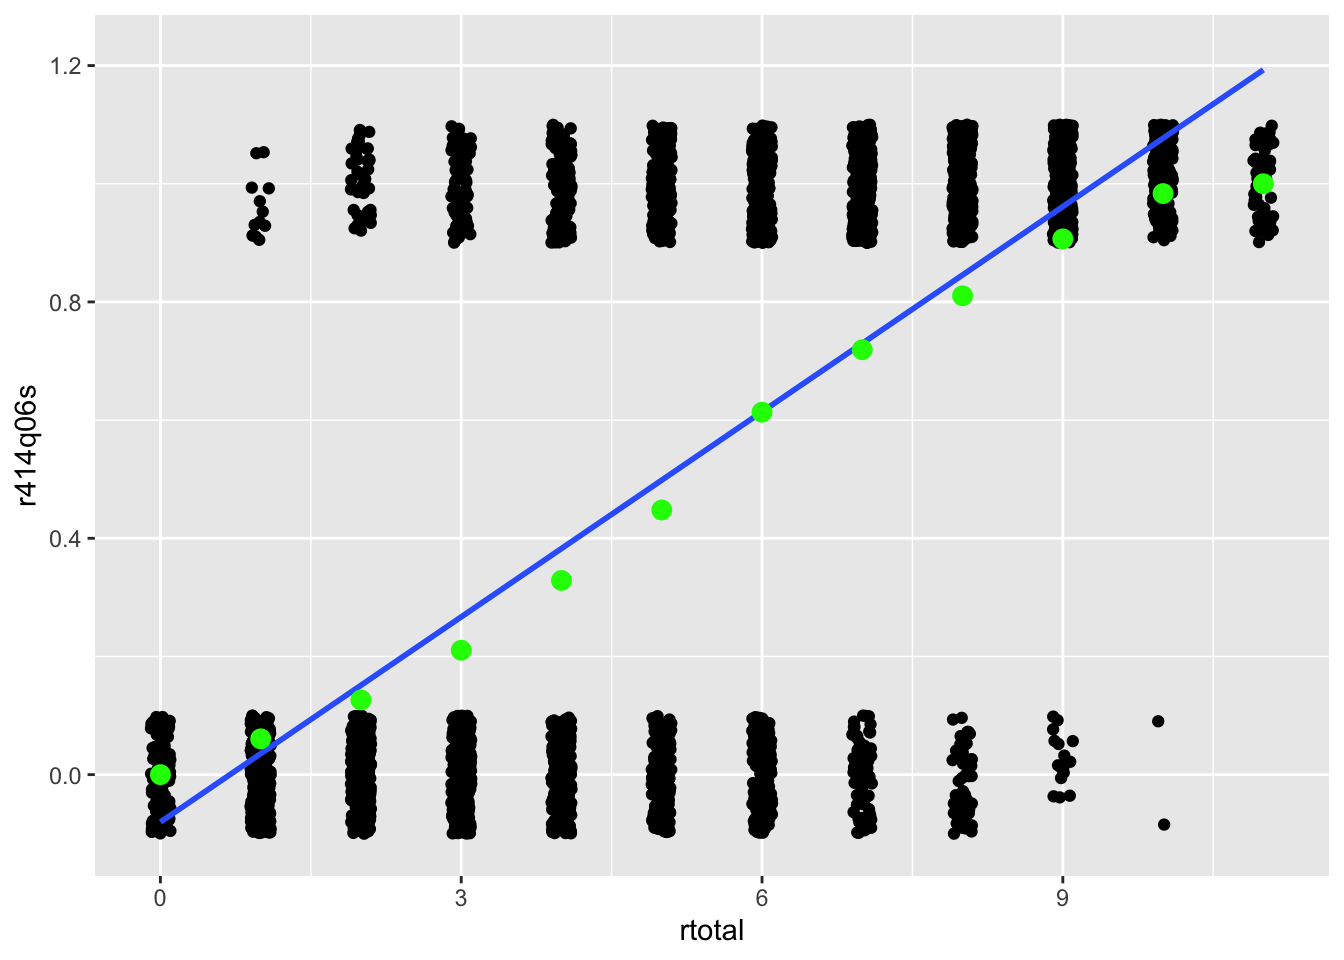 Scatter plots showing the relationship between total scores on the x-axis and scores from PISA item `r452q06s` on the y-axis. Lines represent the relationship between the construct and item scores for CTT (straight) and IRT (curved).